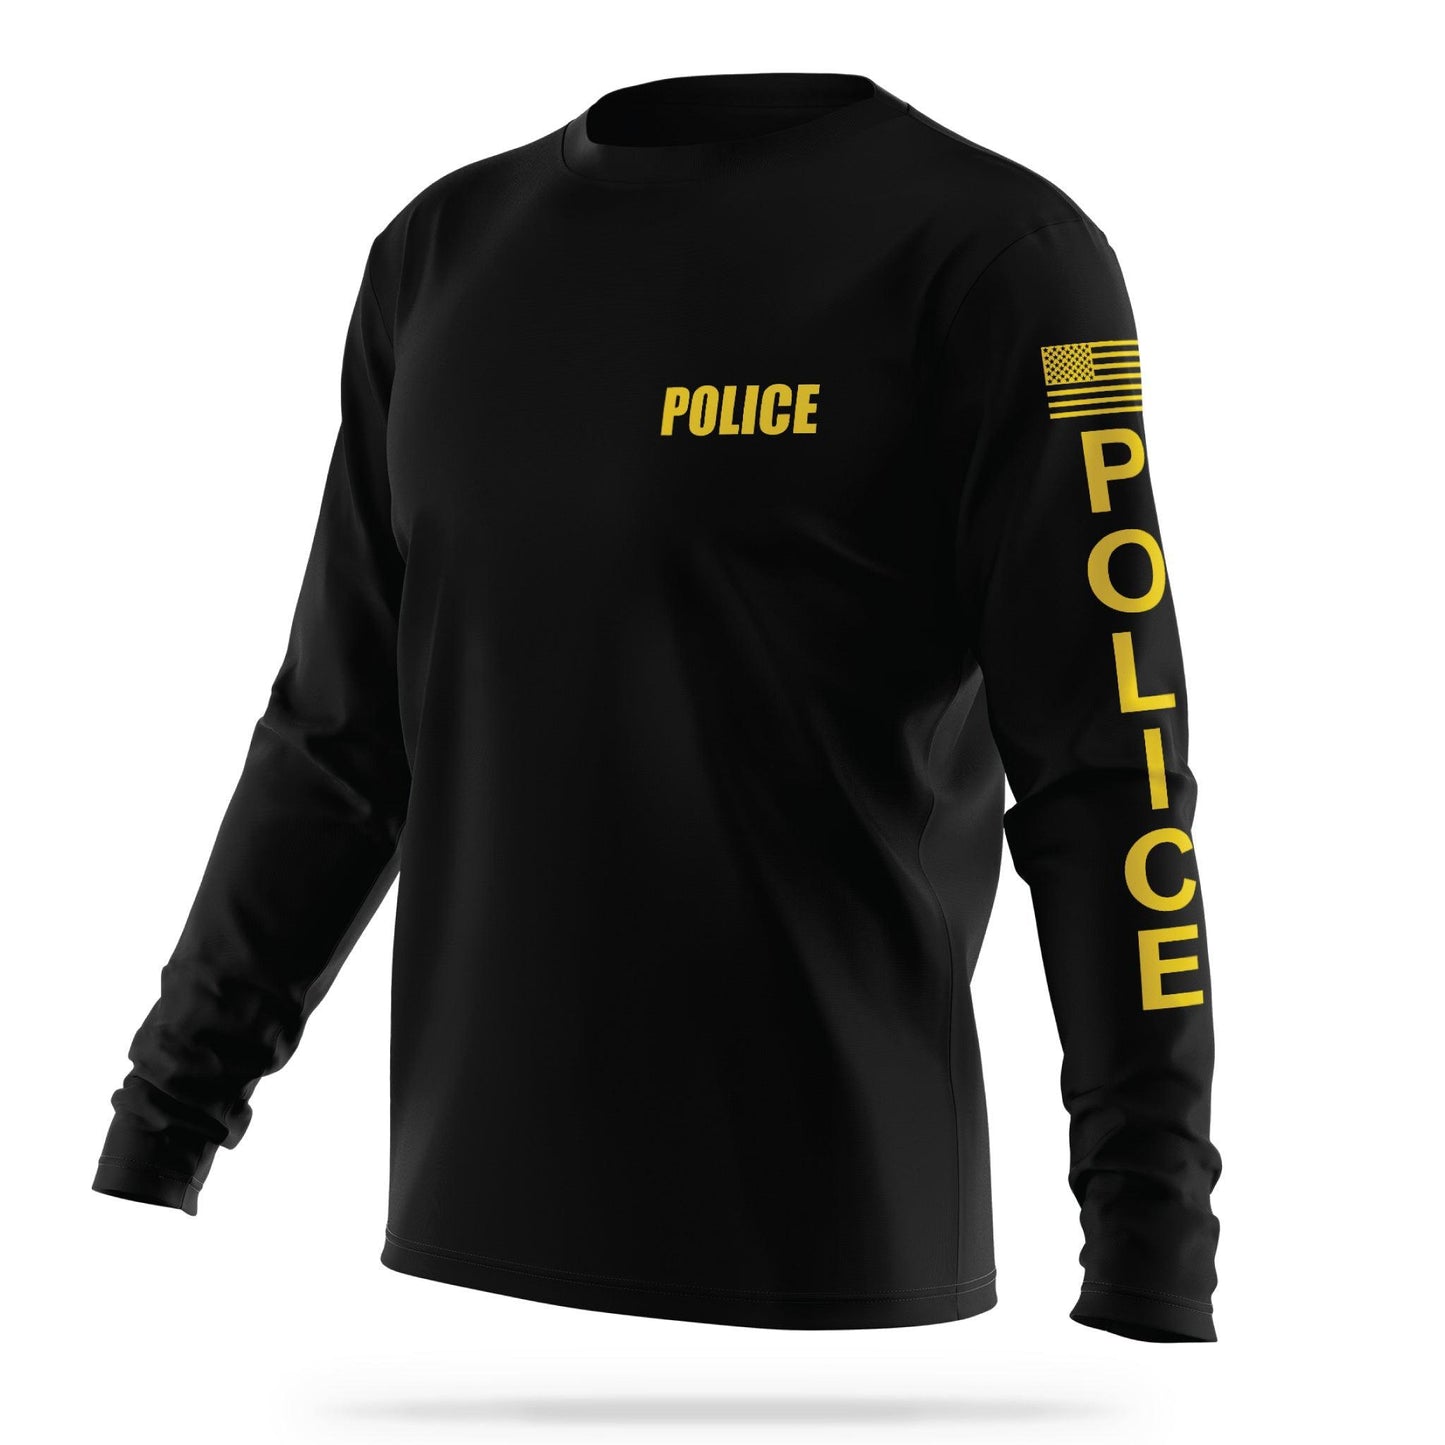 [POLICE] Men's Utility Long Sleeve [BLK/GLD]-13 Fifty Apparel